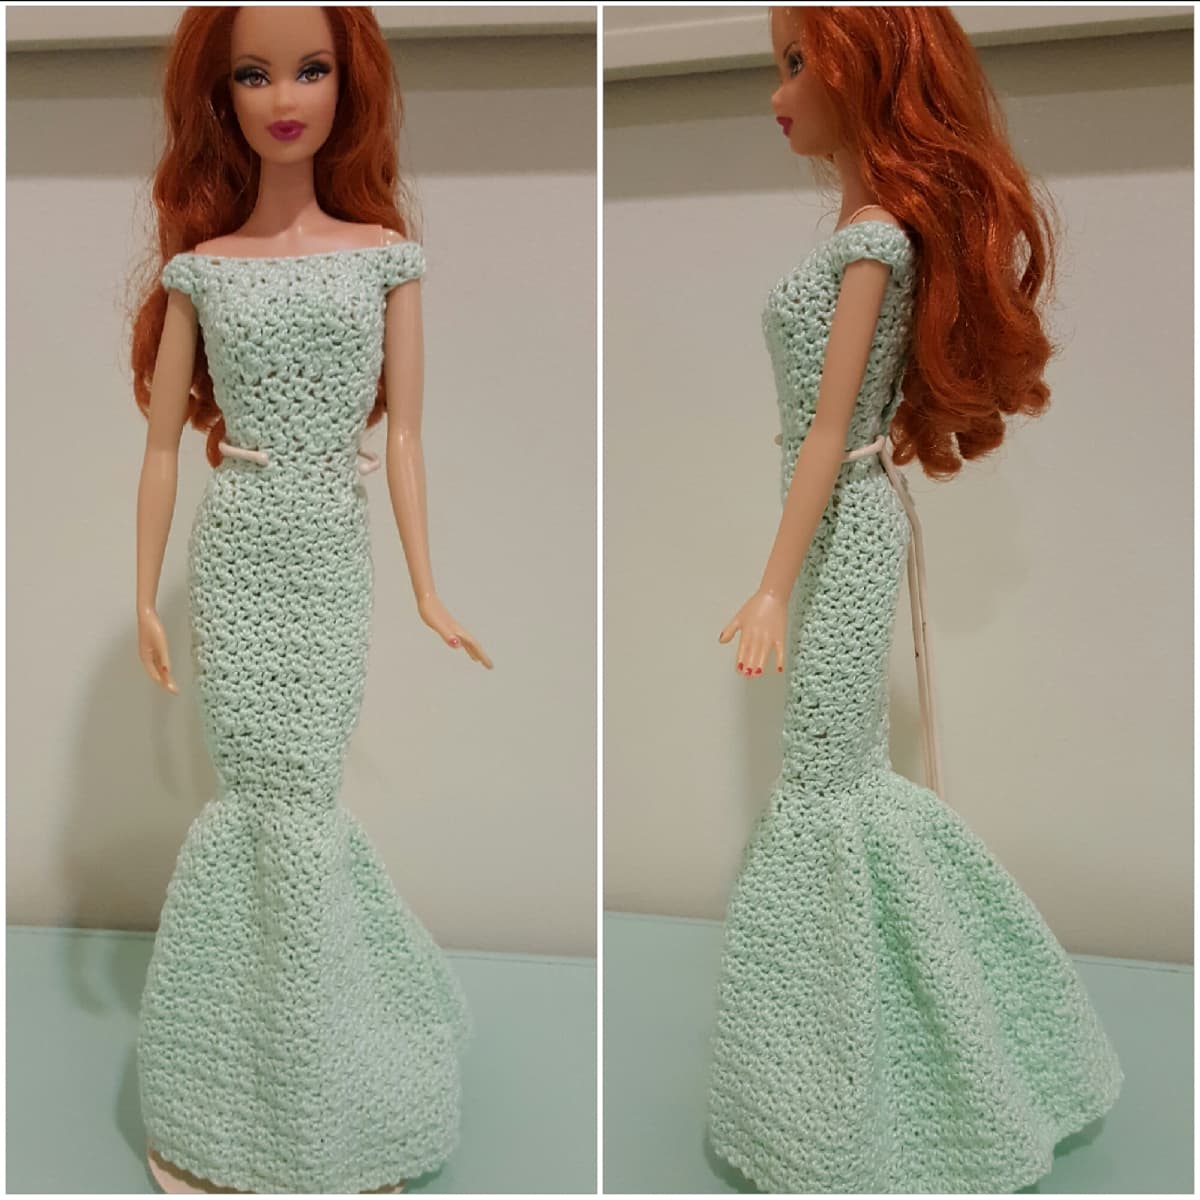 1XL-5XL Mermaid Dress PDF Sewing Pattern Plus Size Wedding Gown Fishtail  Prom Dress Sweetheart Bridesmaid Outfit Fit Flare Evening Ball Gown - Etsy